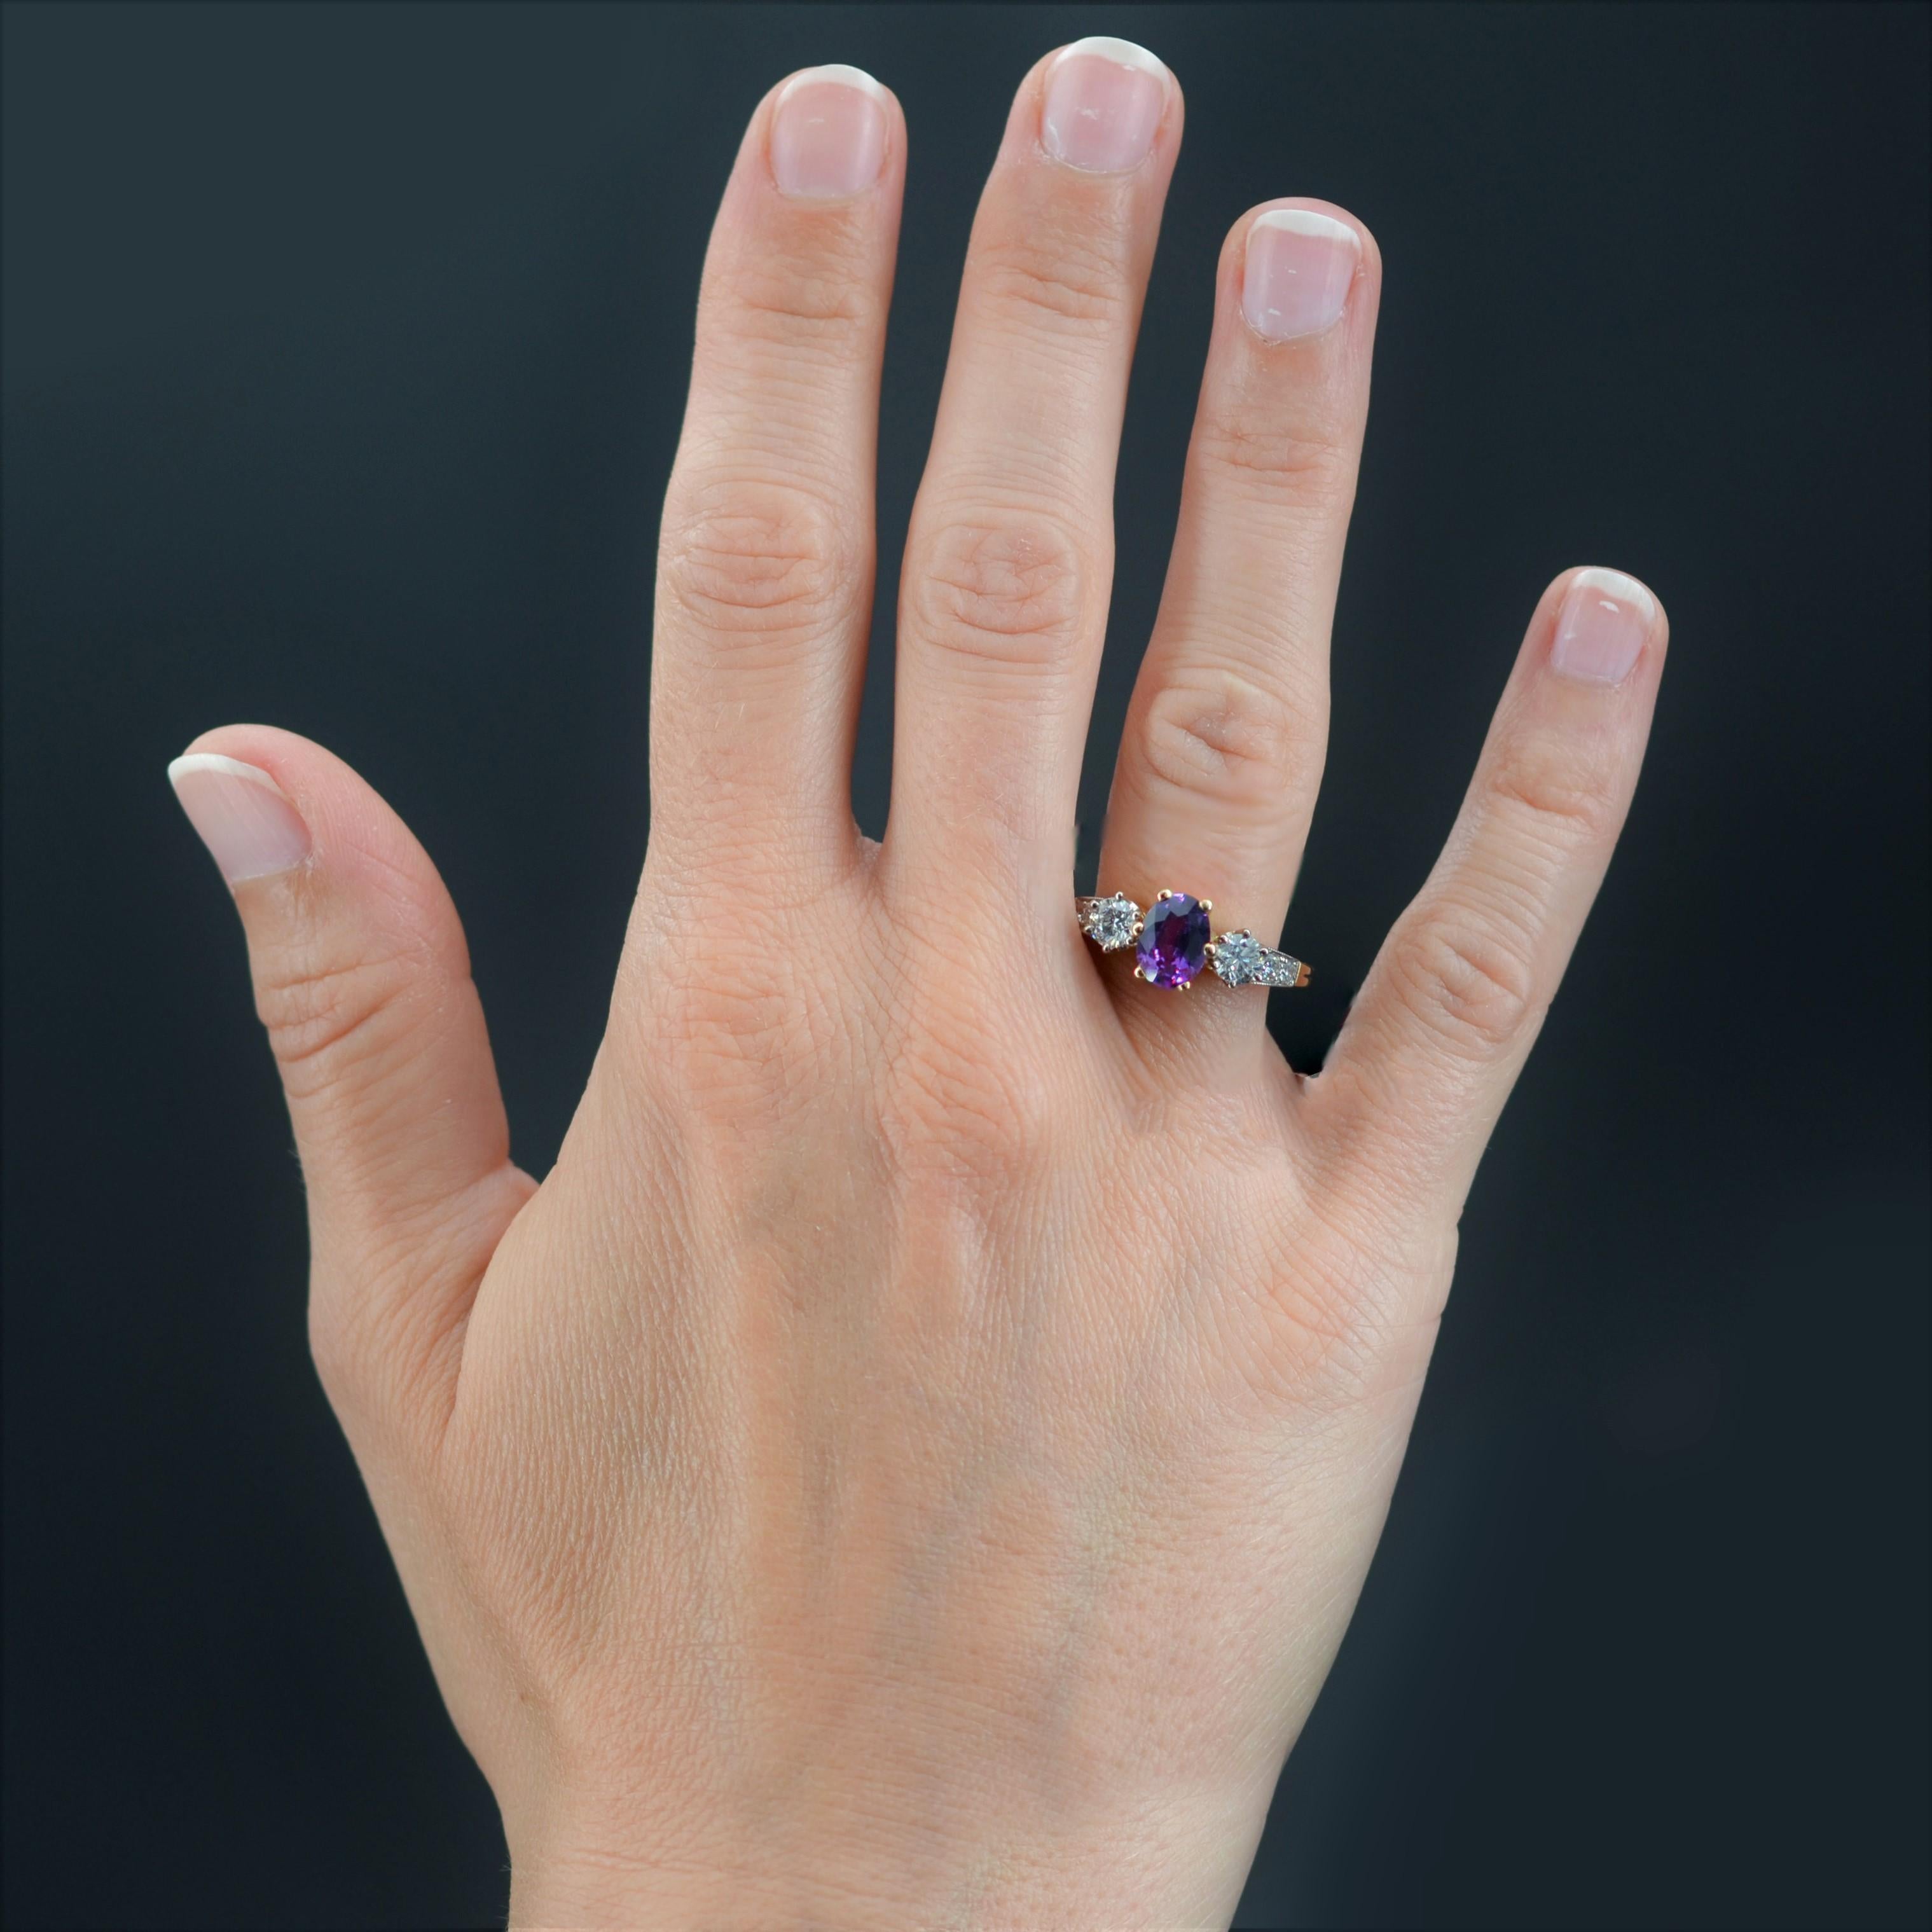 Ring in 18 karat yellow gold, eagle head hallmark and platinum, dog head hallmark.
This sapphire ring is set on its top with a purple sapphire with 6 claws and 2 modern brilliant- cut diamonds. On the beginning of the ring, on both sides are set 2 x